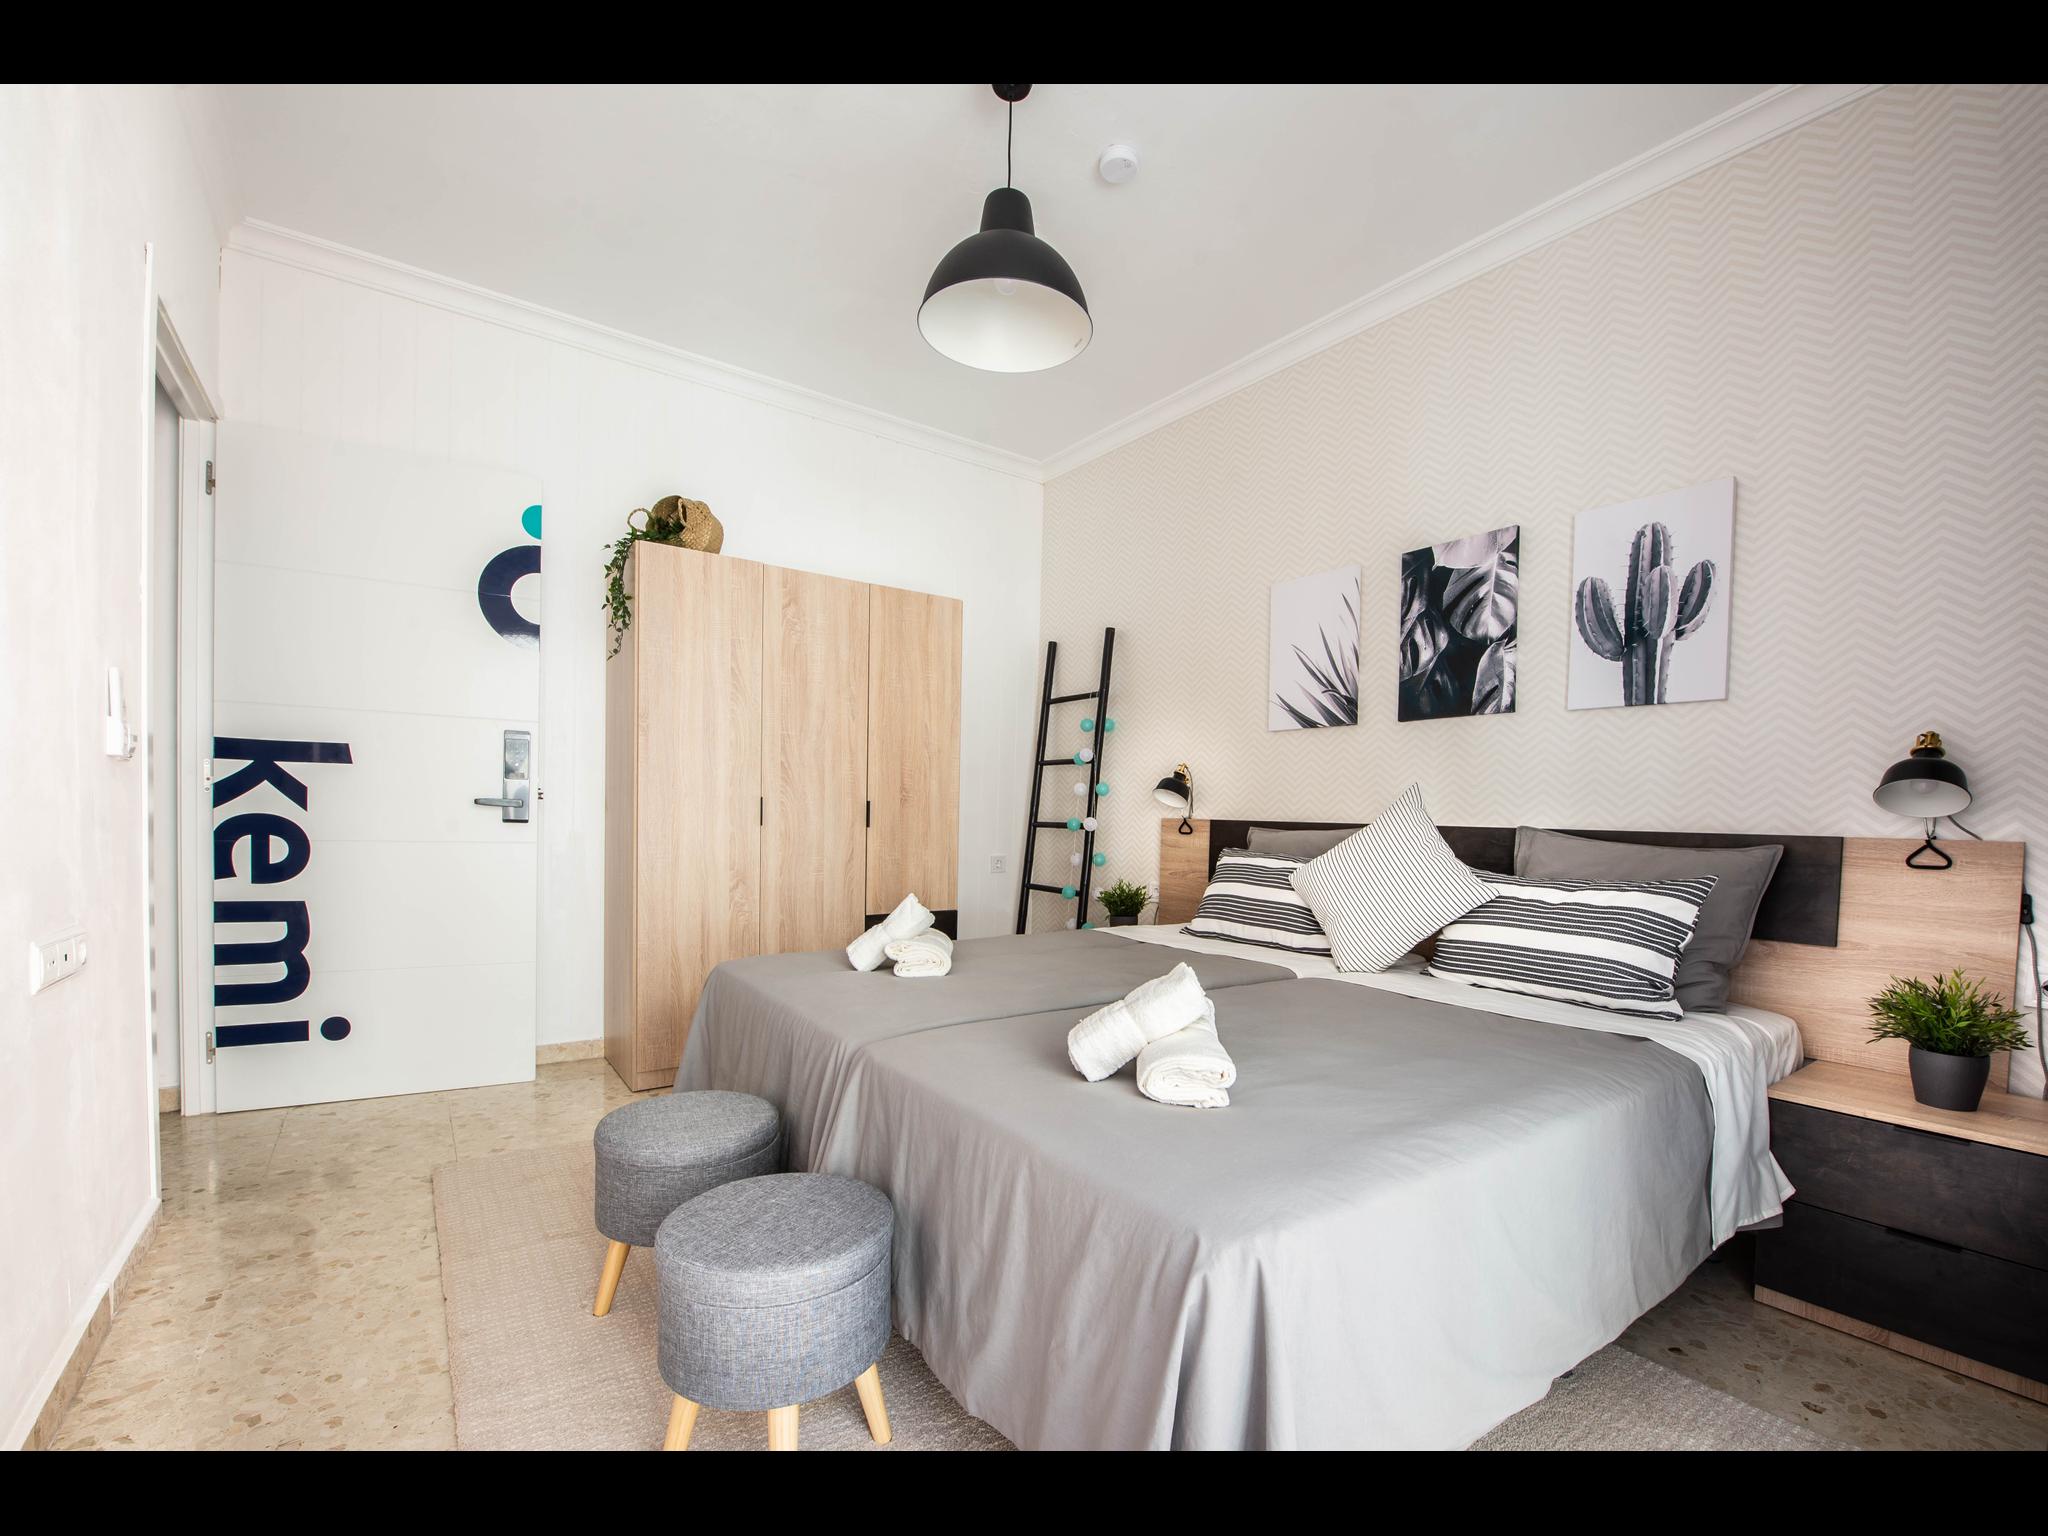 Monje - Exclusive 1 Bedroom Flat in Malaga